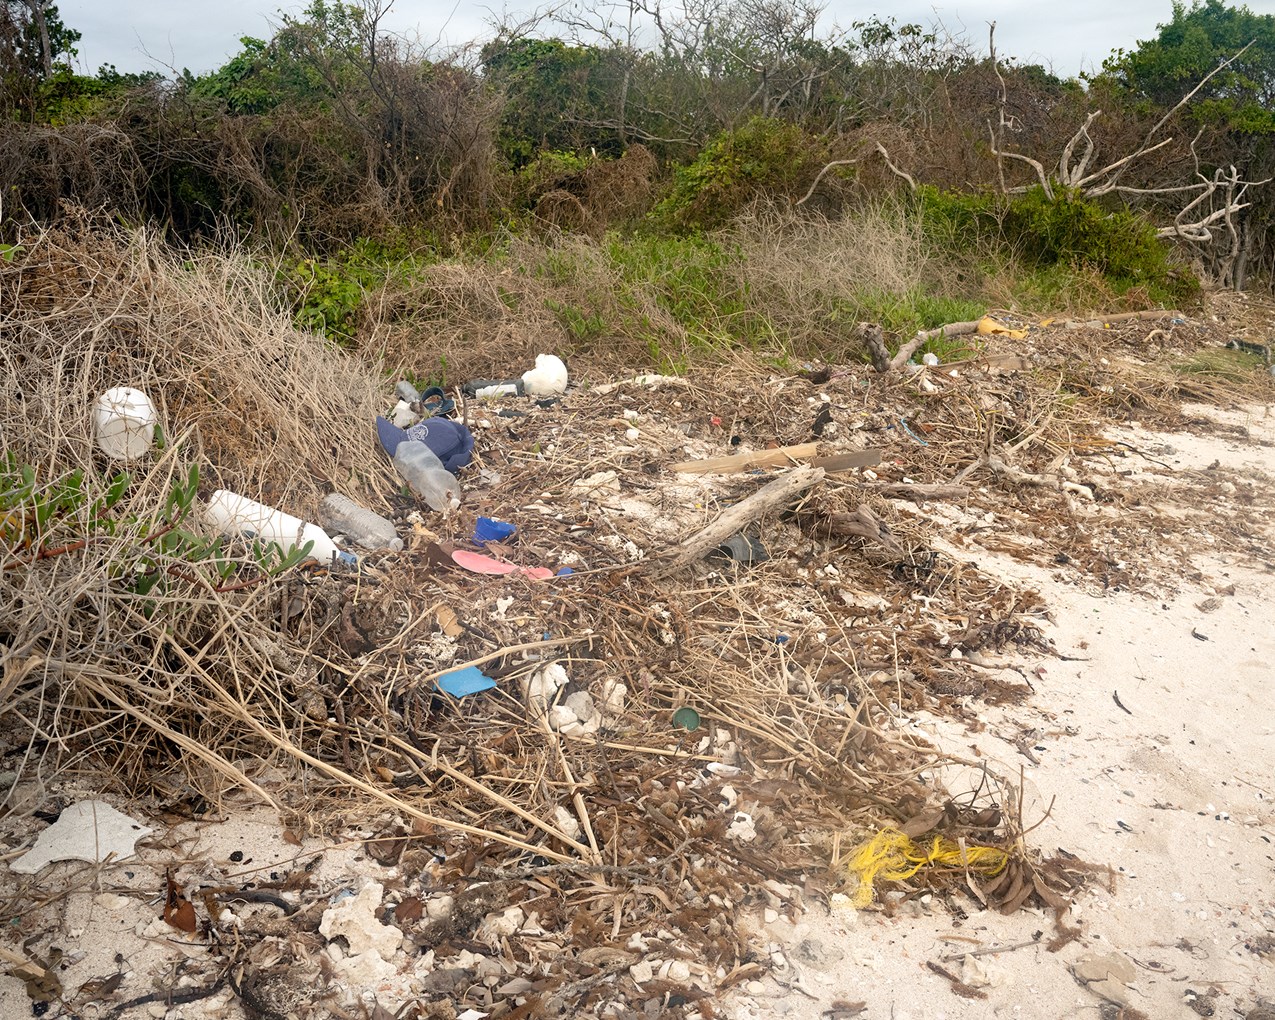 Sandy beach and a messy wrack line is strewn with garbage.